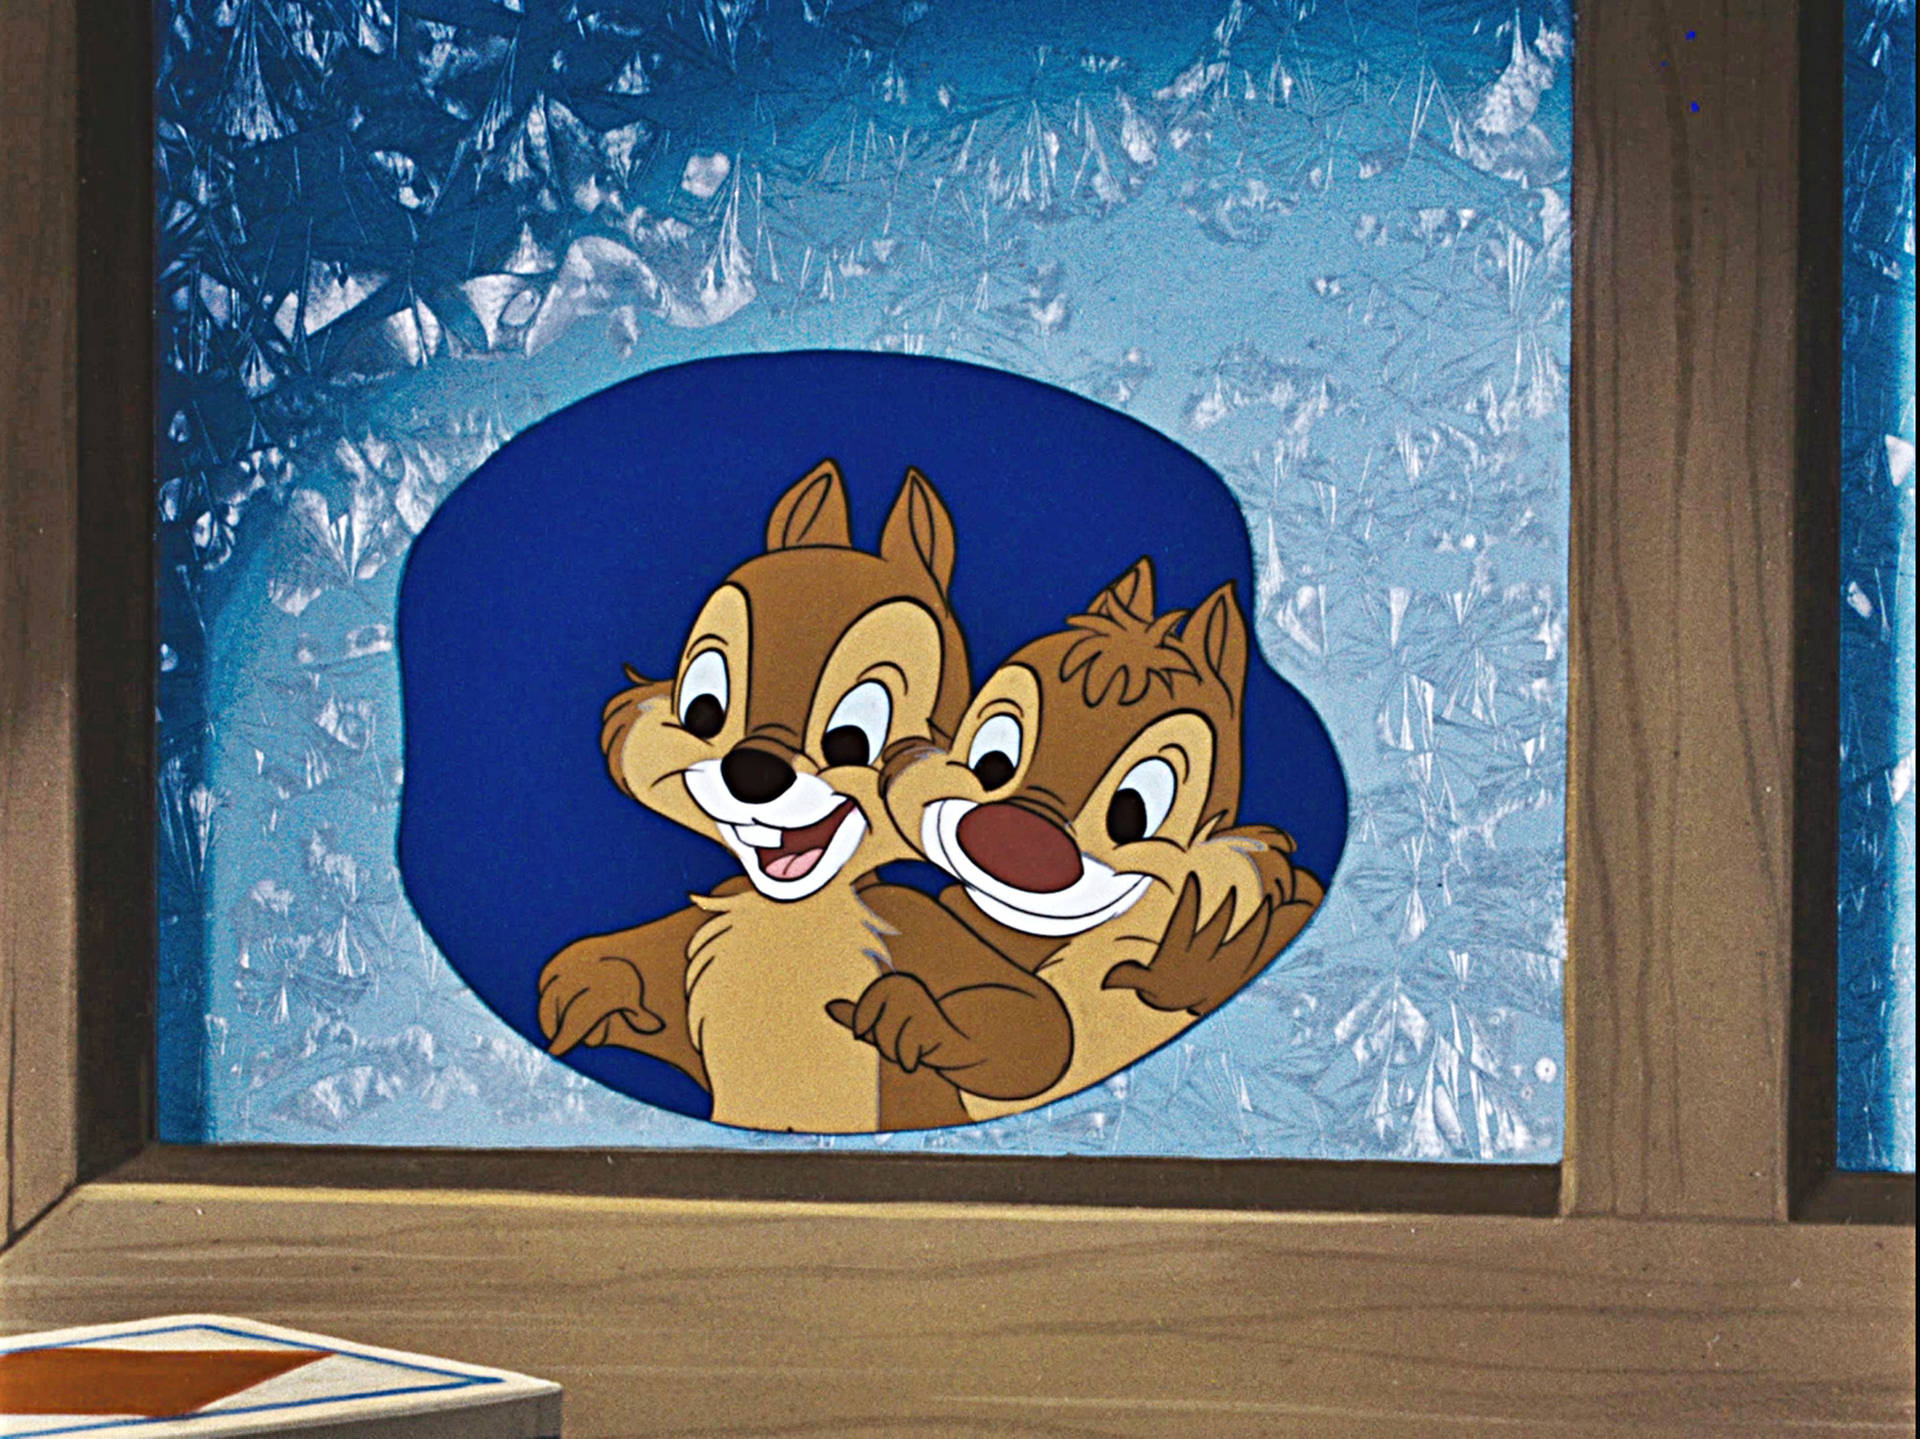 Free Chip N Dale Wallpaper Downloads, [100+] Chip N Dale Wallpapers for FREE  